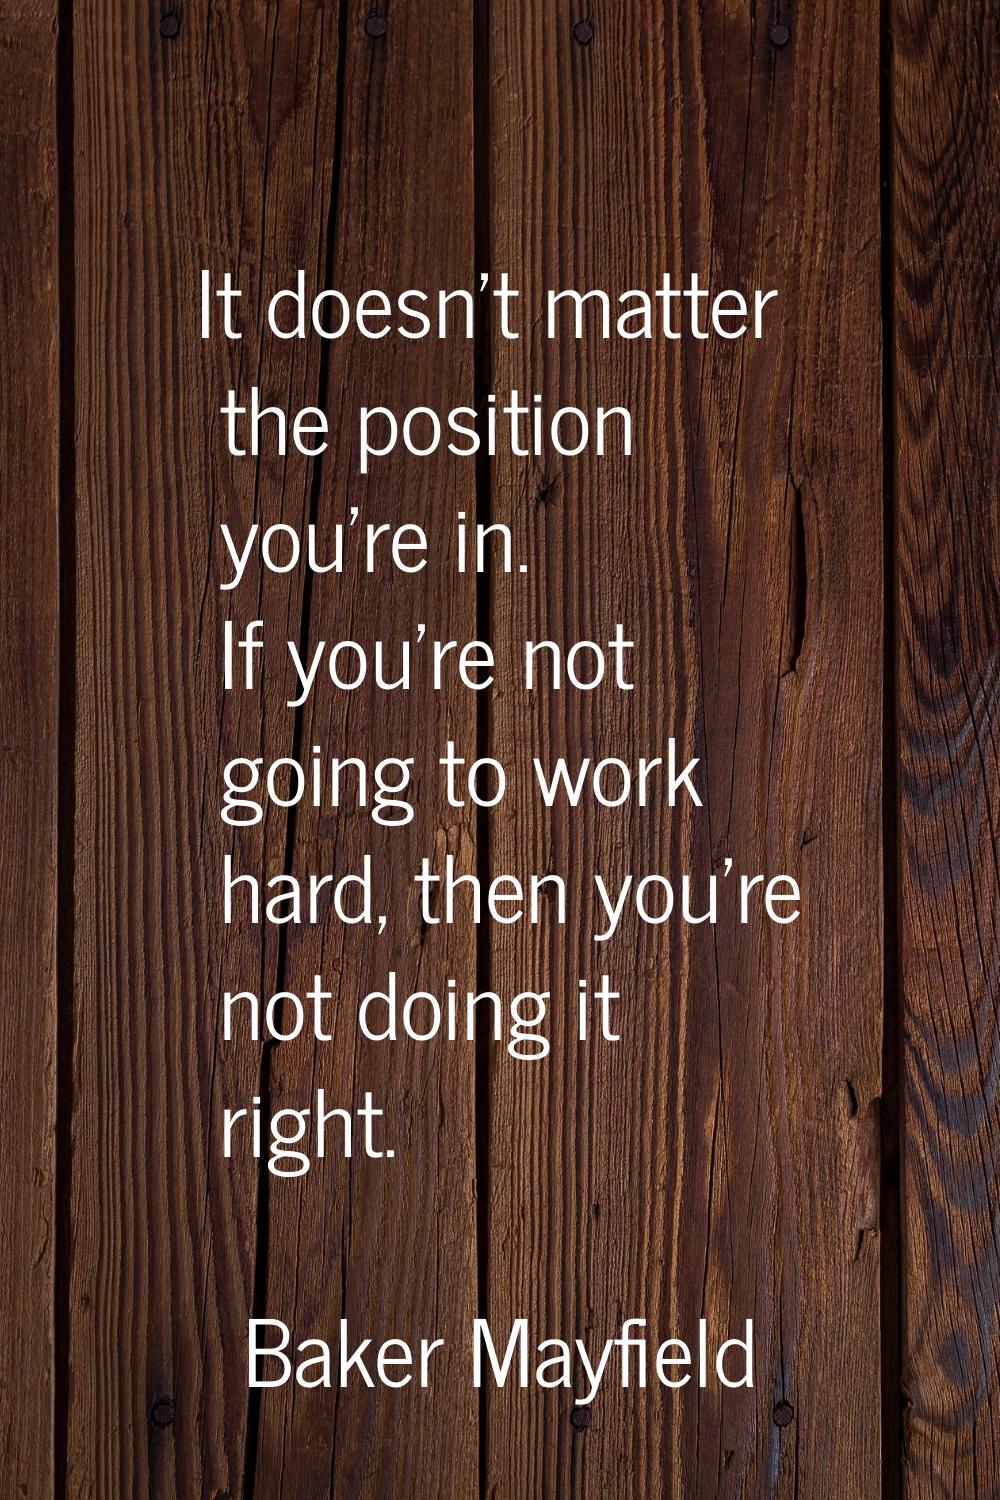 It doesn't matter the position you're in. If you're not going to work hard, then you're not doing i